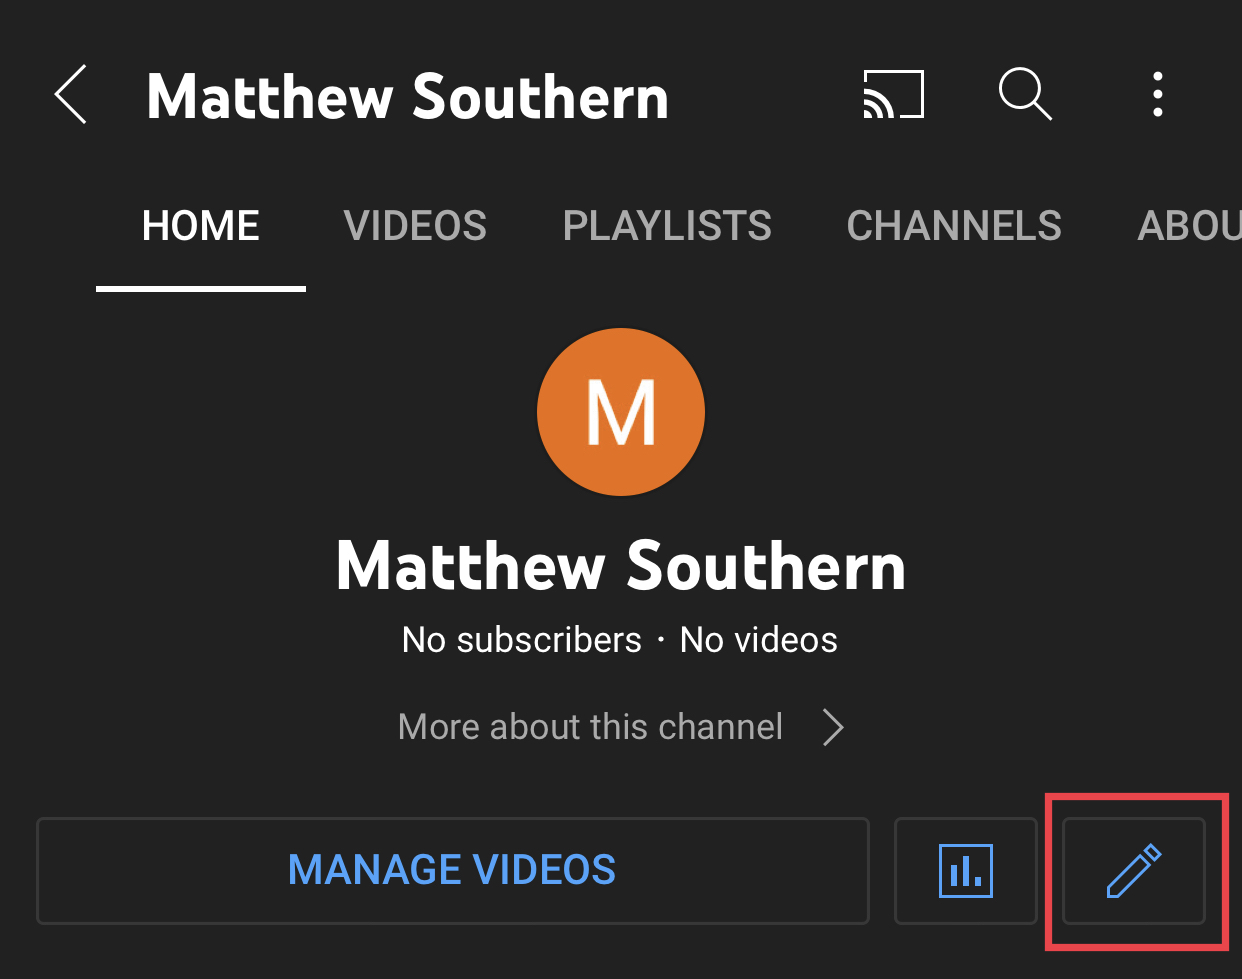 Change the name of the YouTube channel